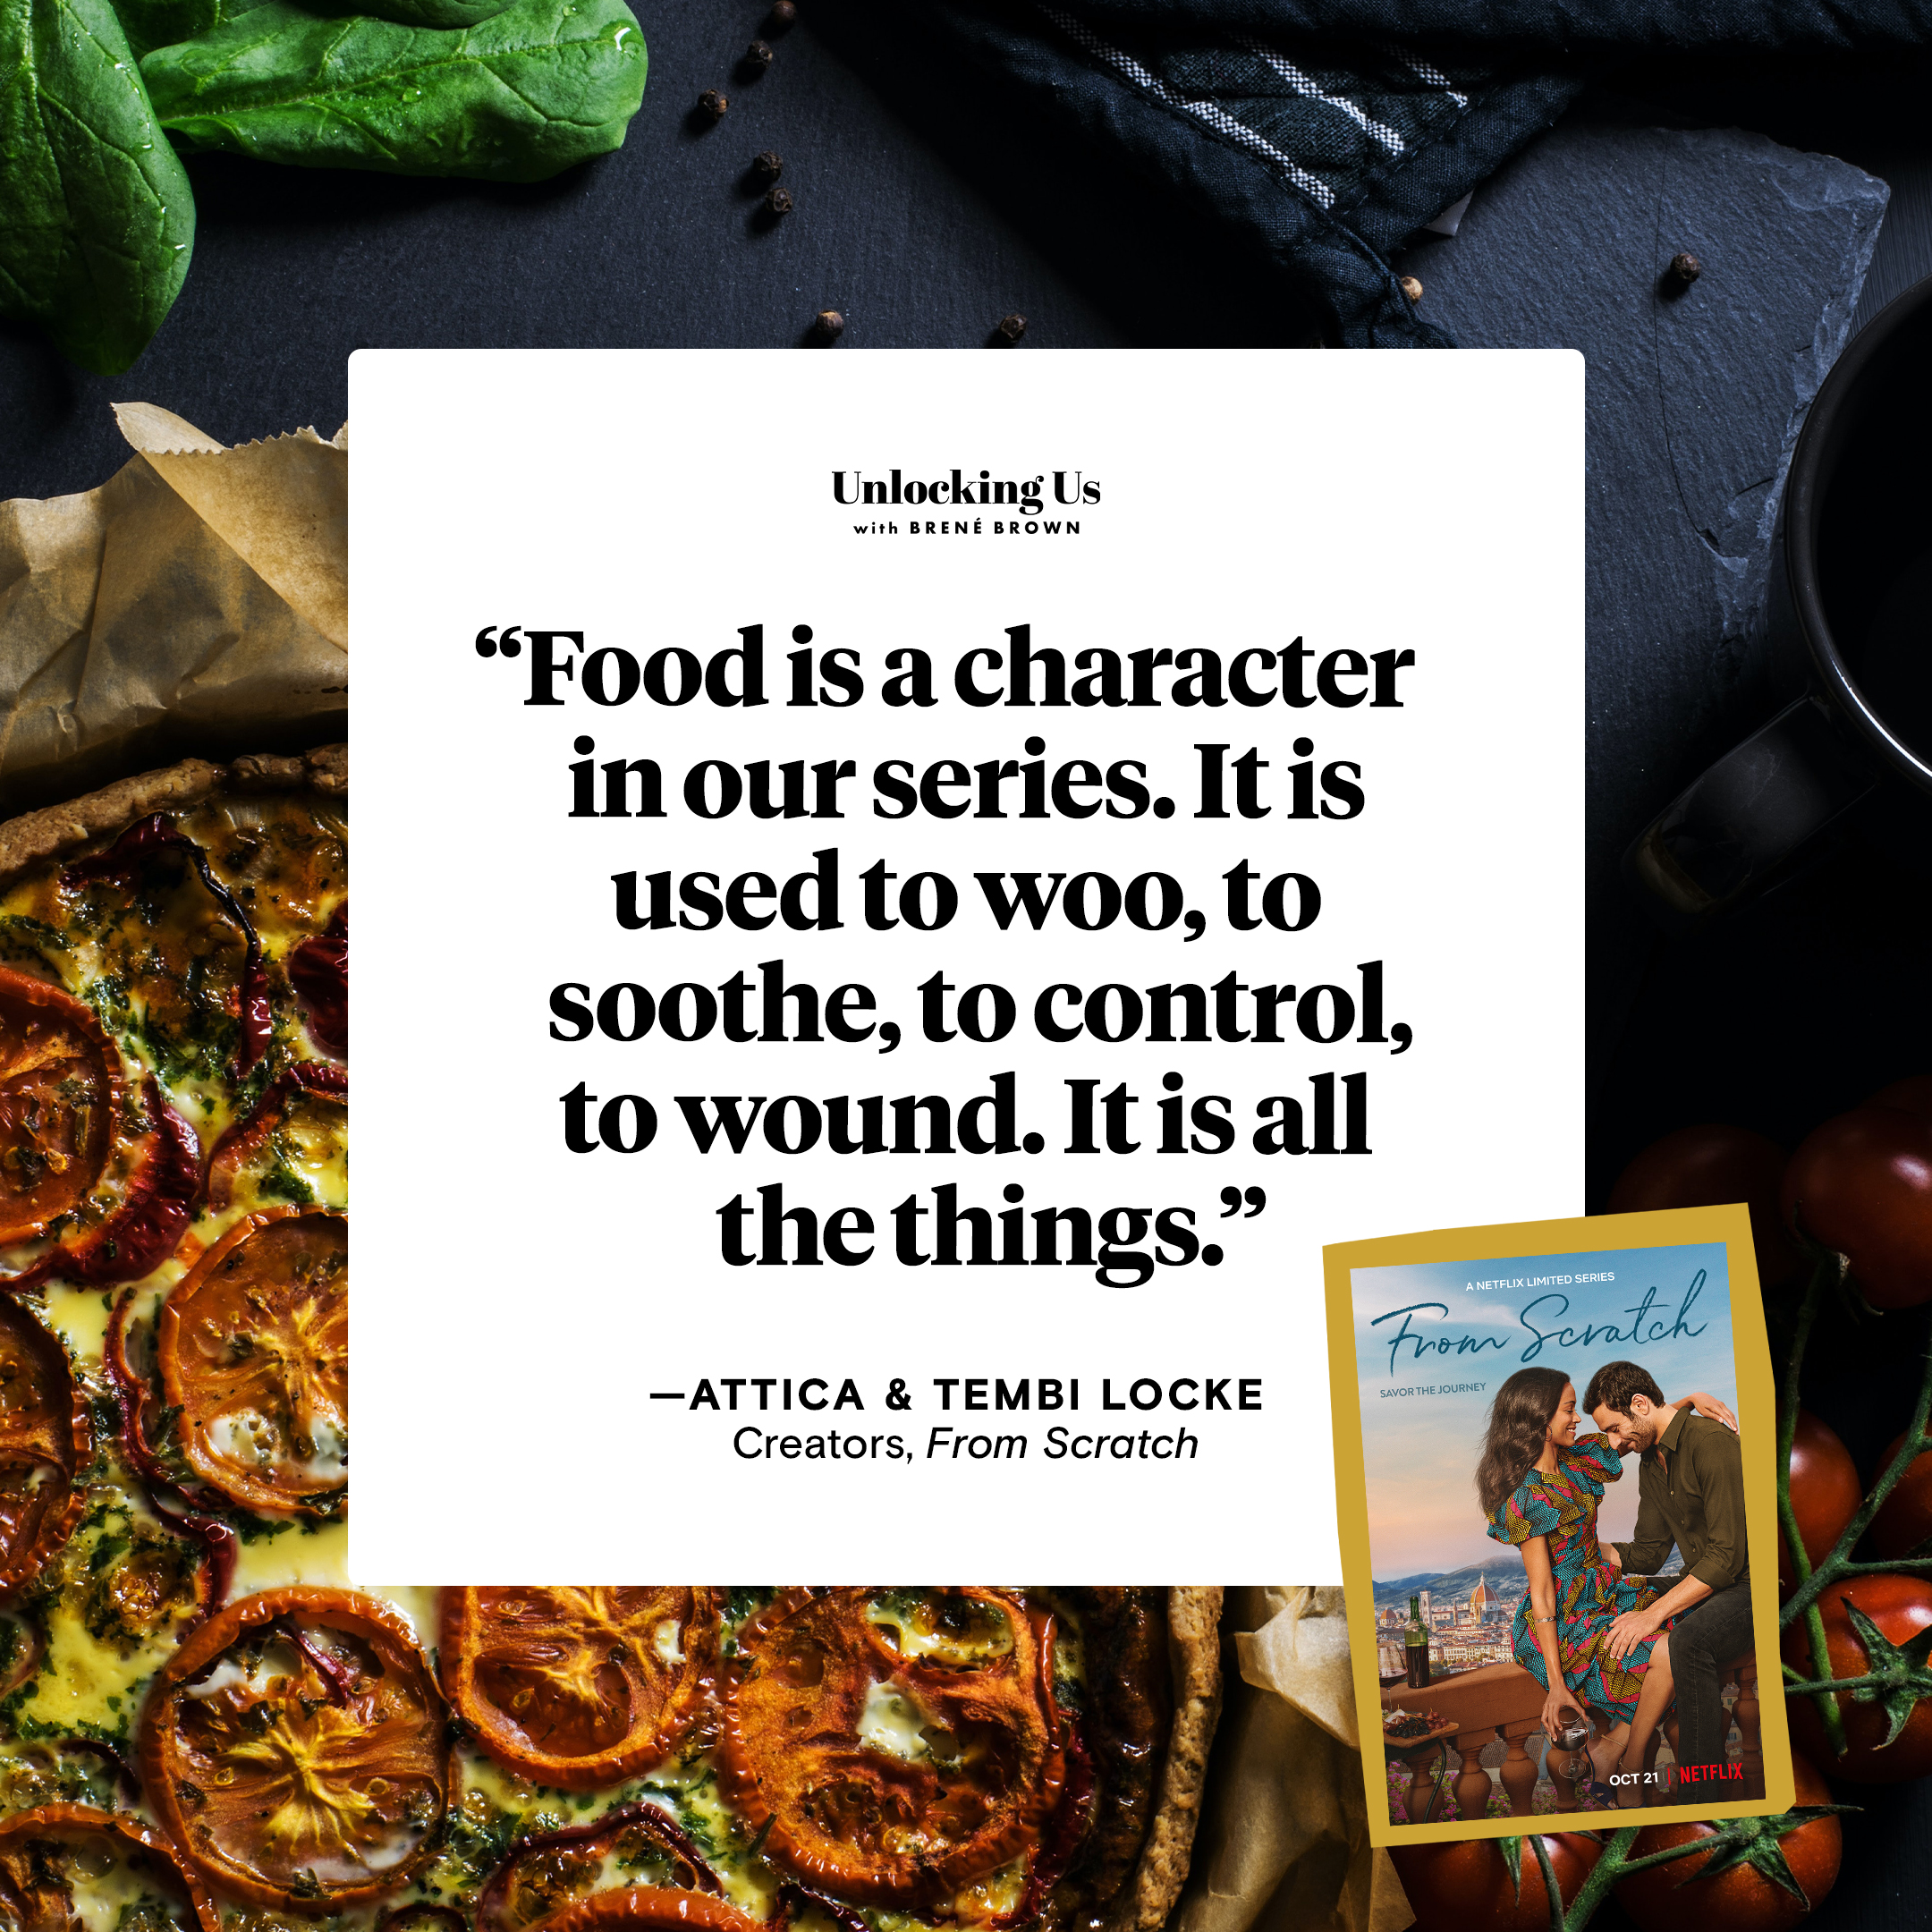 A quote from Tembi Locke, who appeared on the Unlocking Us podcast with Brené Brown: Food is a character in our series. It is used to woo, to soothe, to control, to wound. It is all the things.